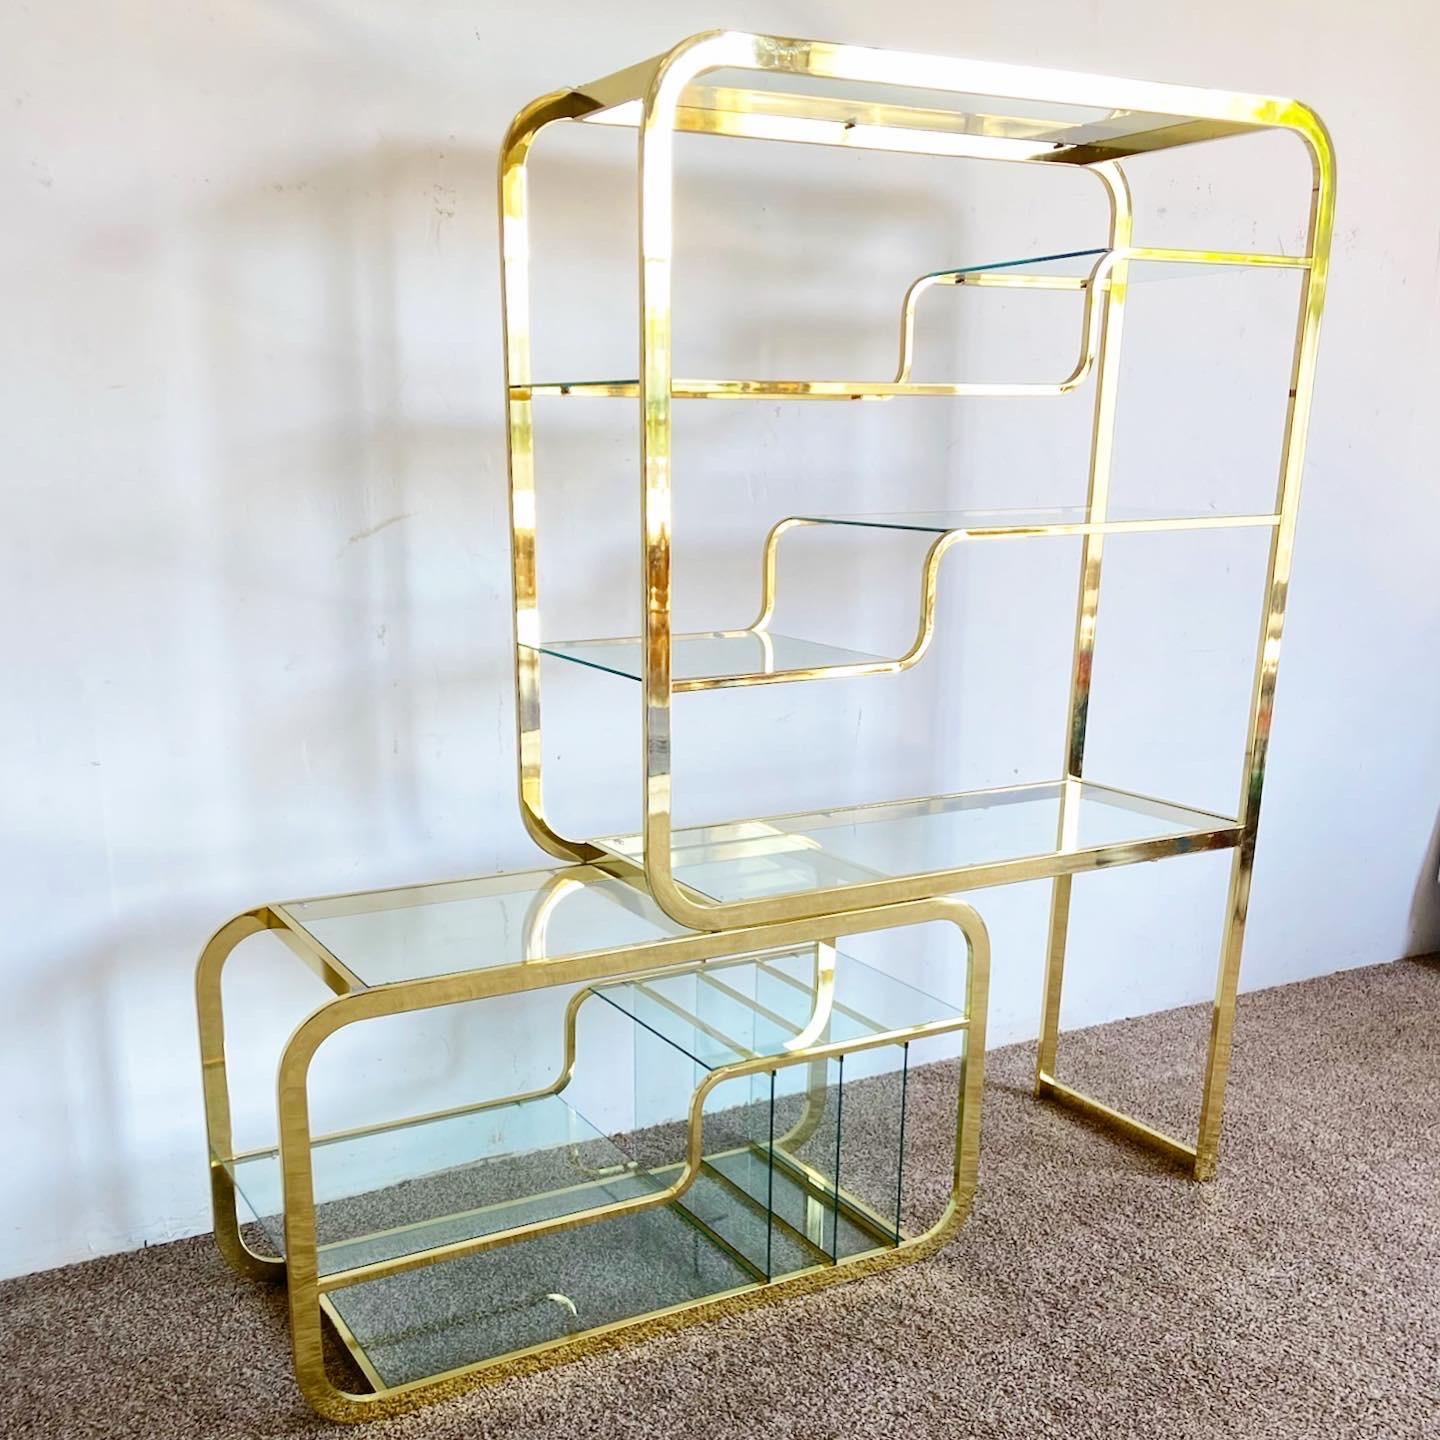 Here it is, the coveted expandable golden Etagere. Features several glass shelves with inserts on the bottom shelf. Displays a fantastic sculpted motif throughout the item.

Extends to 85”W.